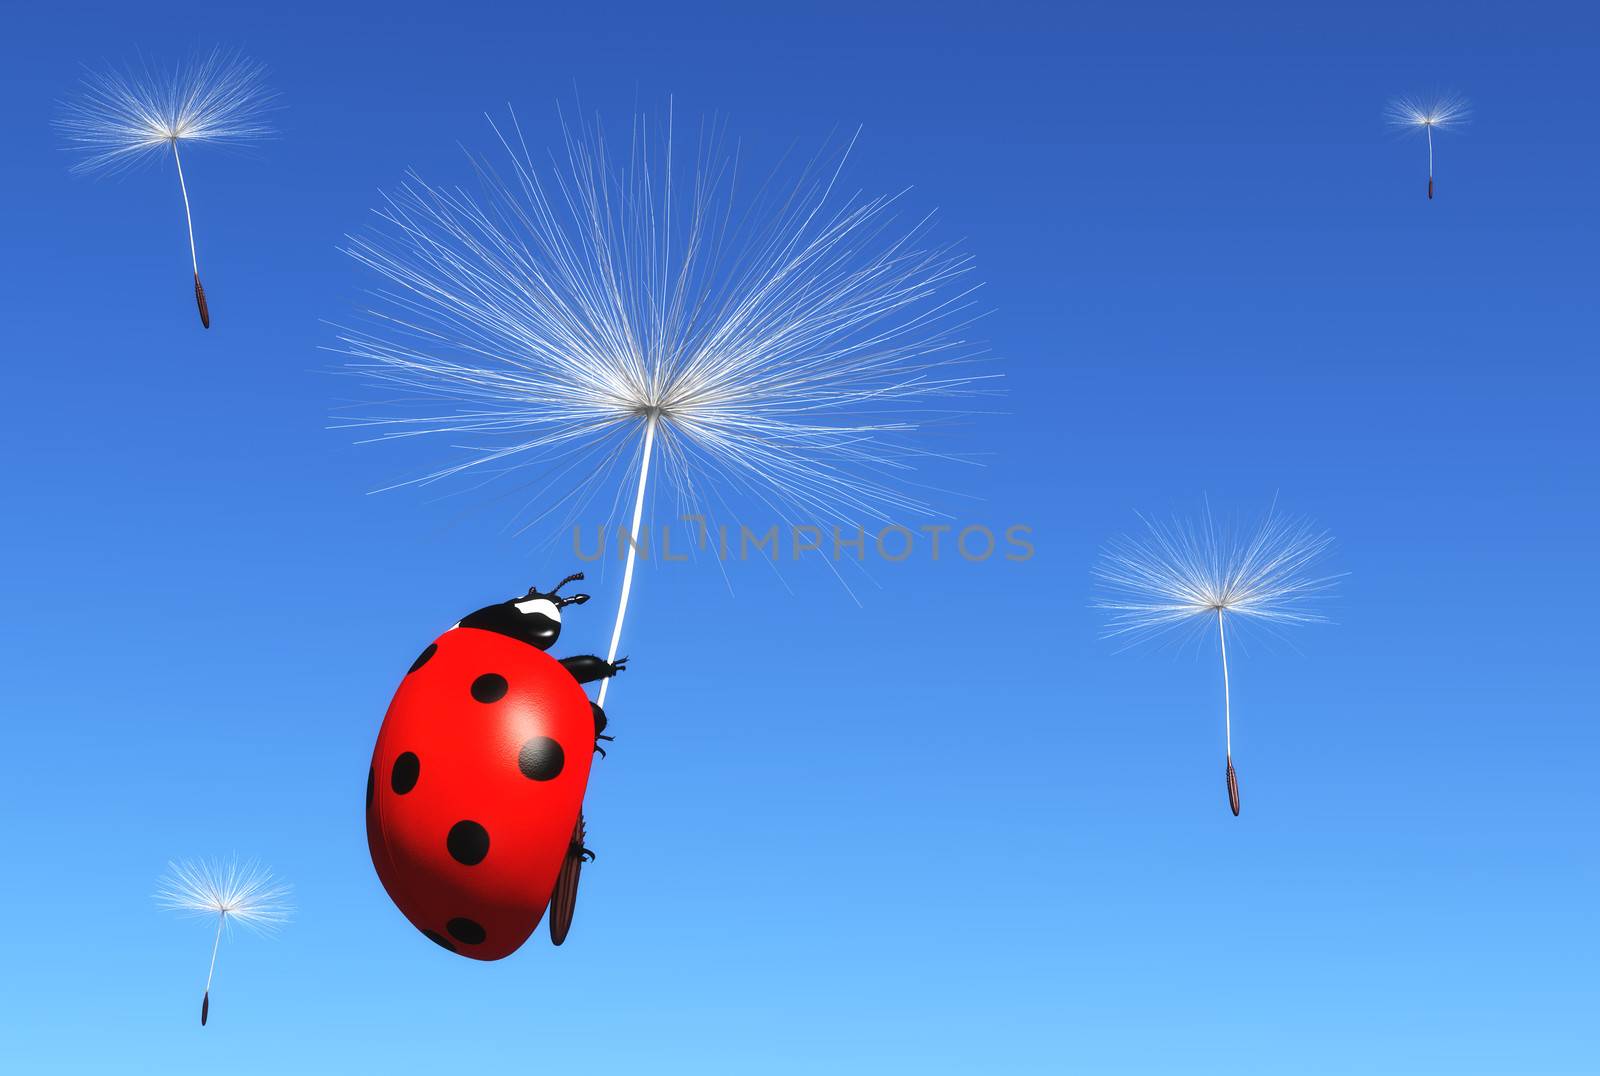 Floret carries a ladybug by TaiChesco